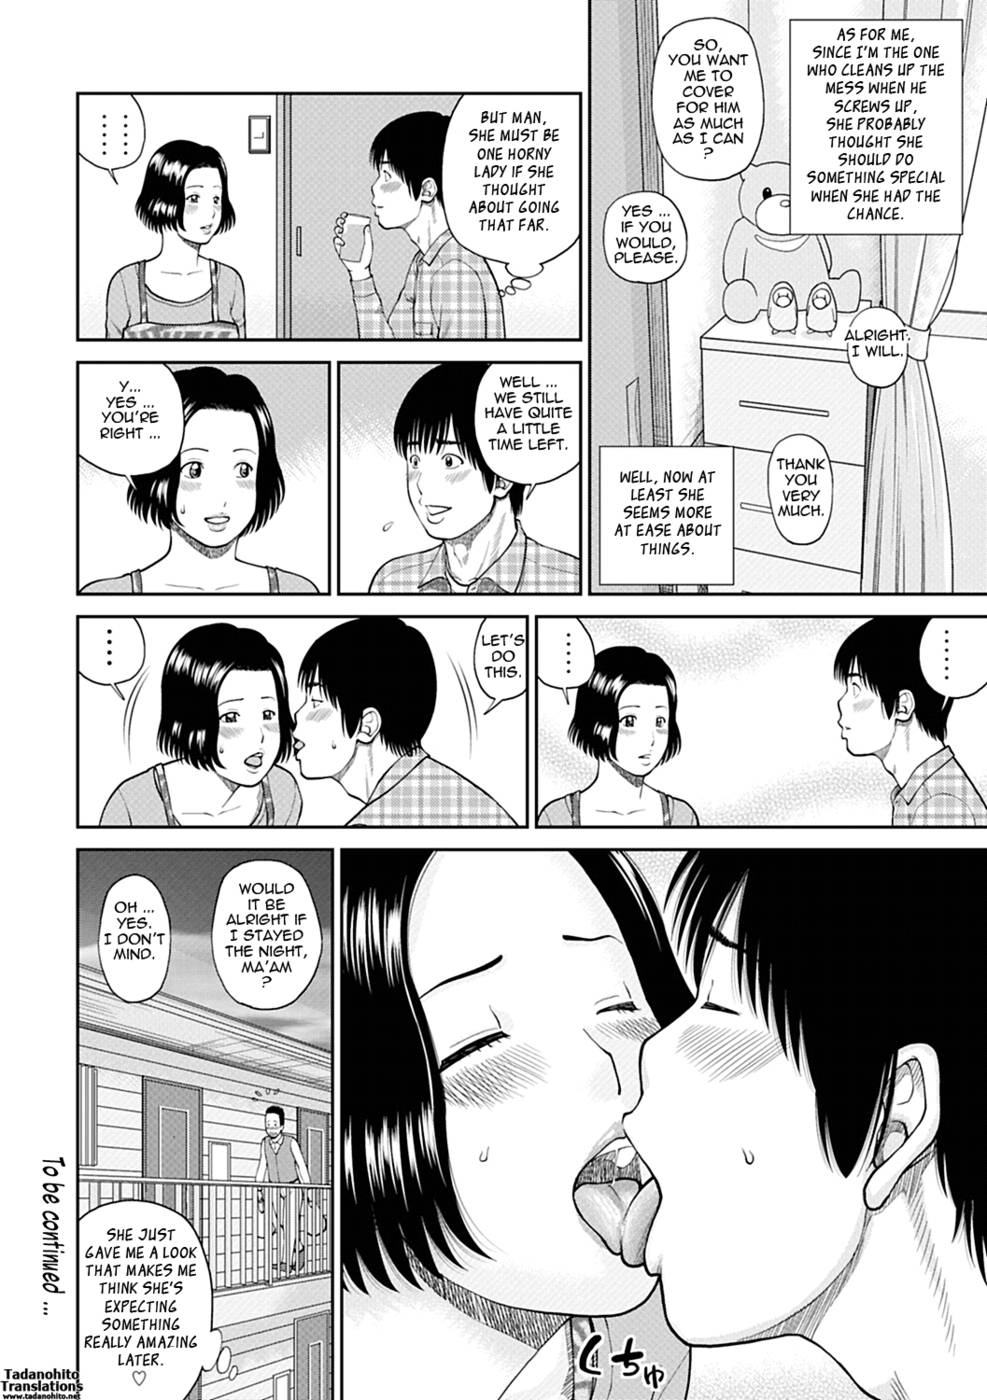 Hentai Manga Comic-34 Year Old Unsatisfied Wife-Chapter 3-Entertaining Wife-First Half-19